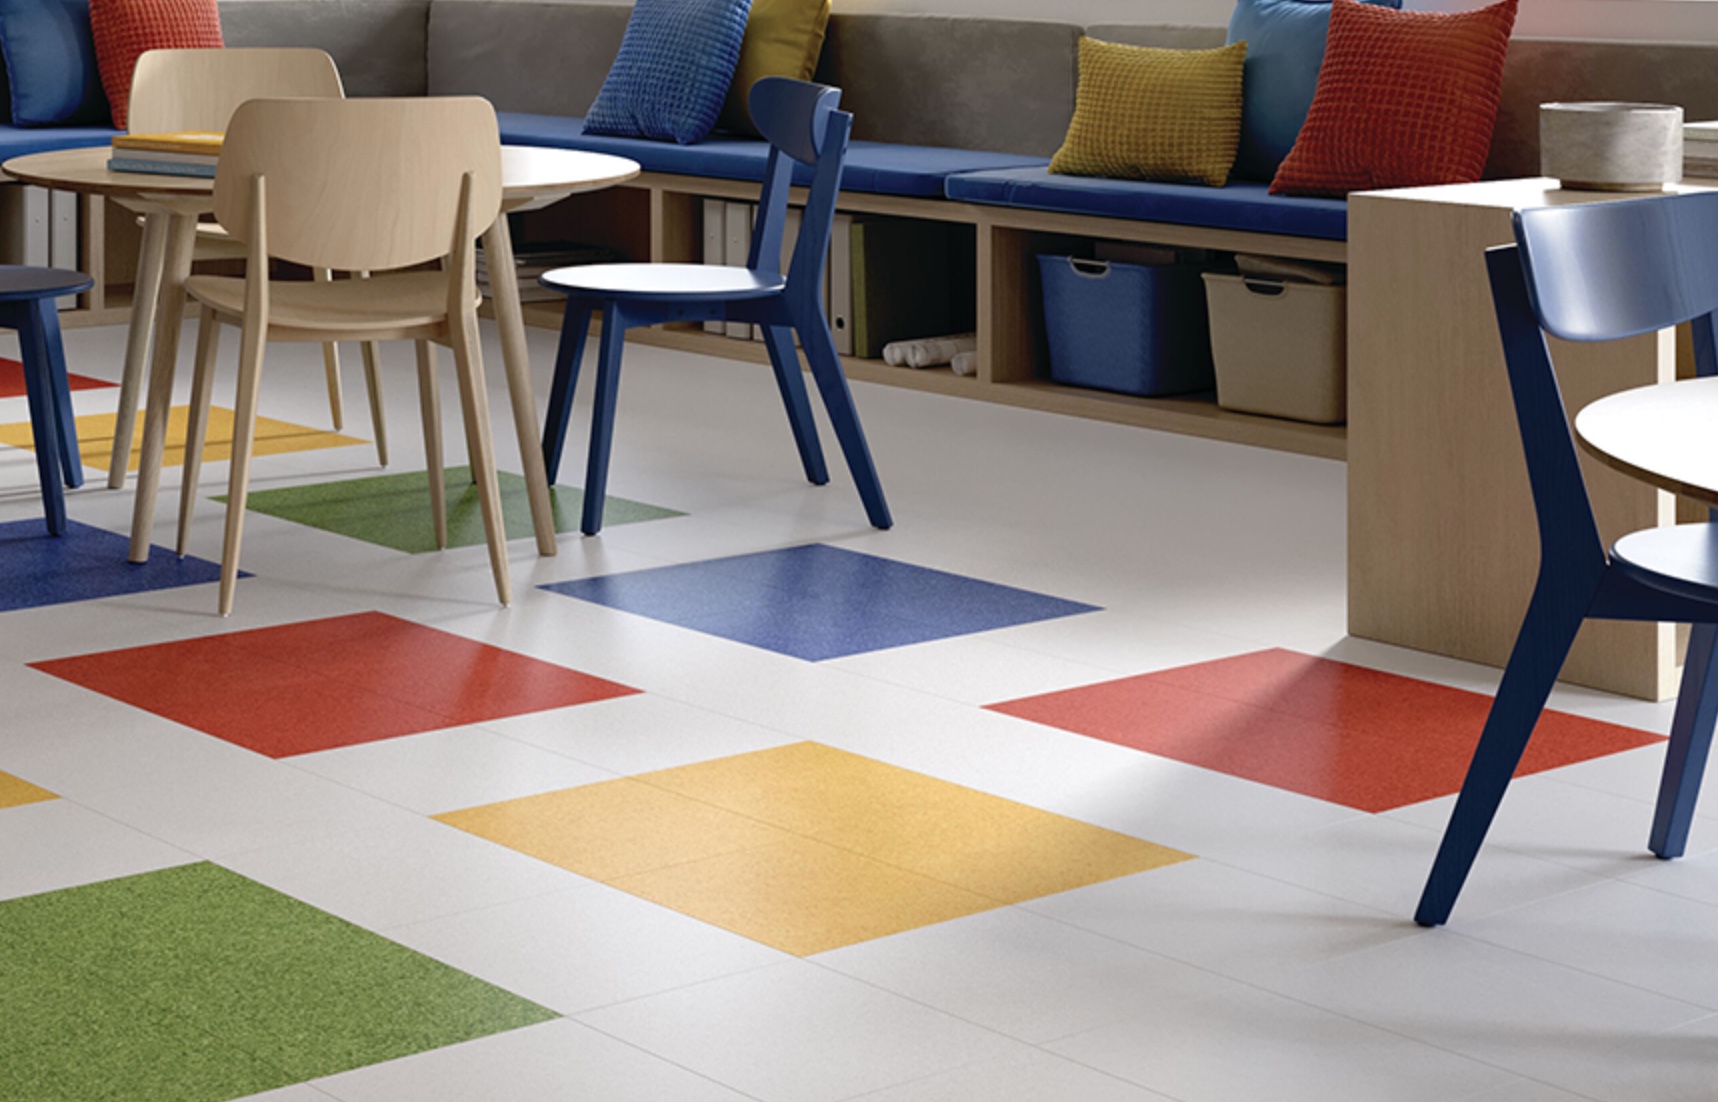 New on the Floor: Vinyl-Based Tile from AHF Products